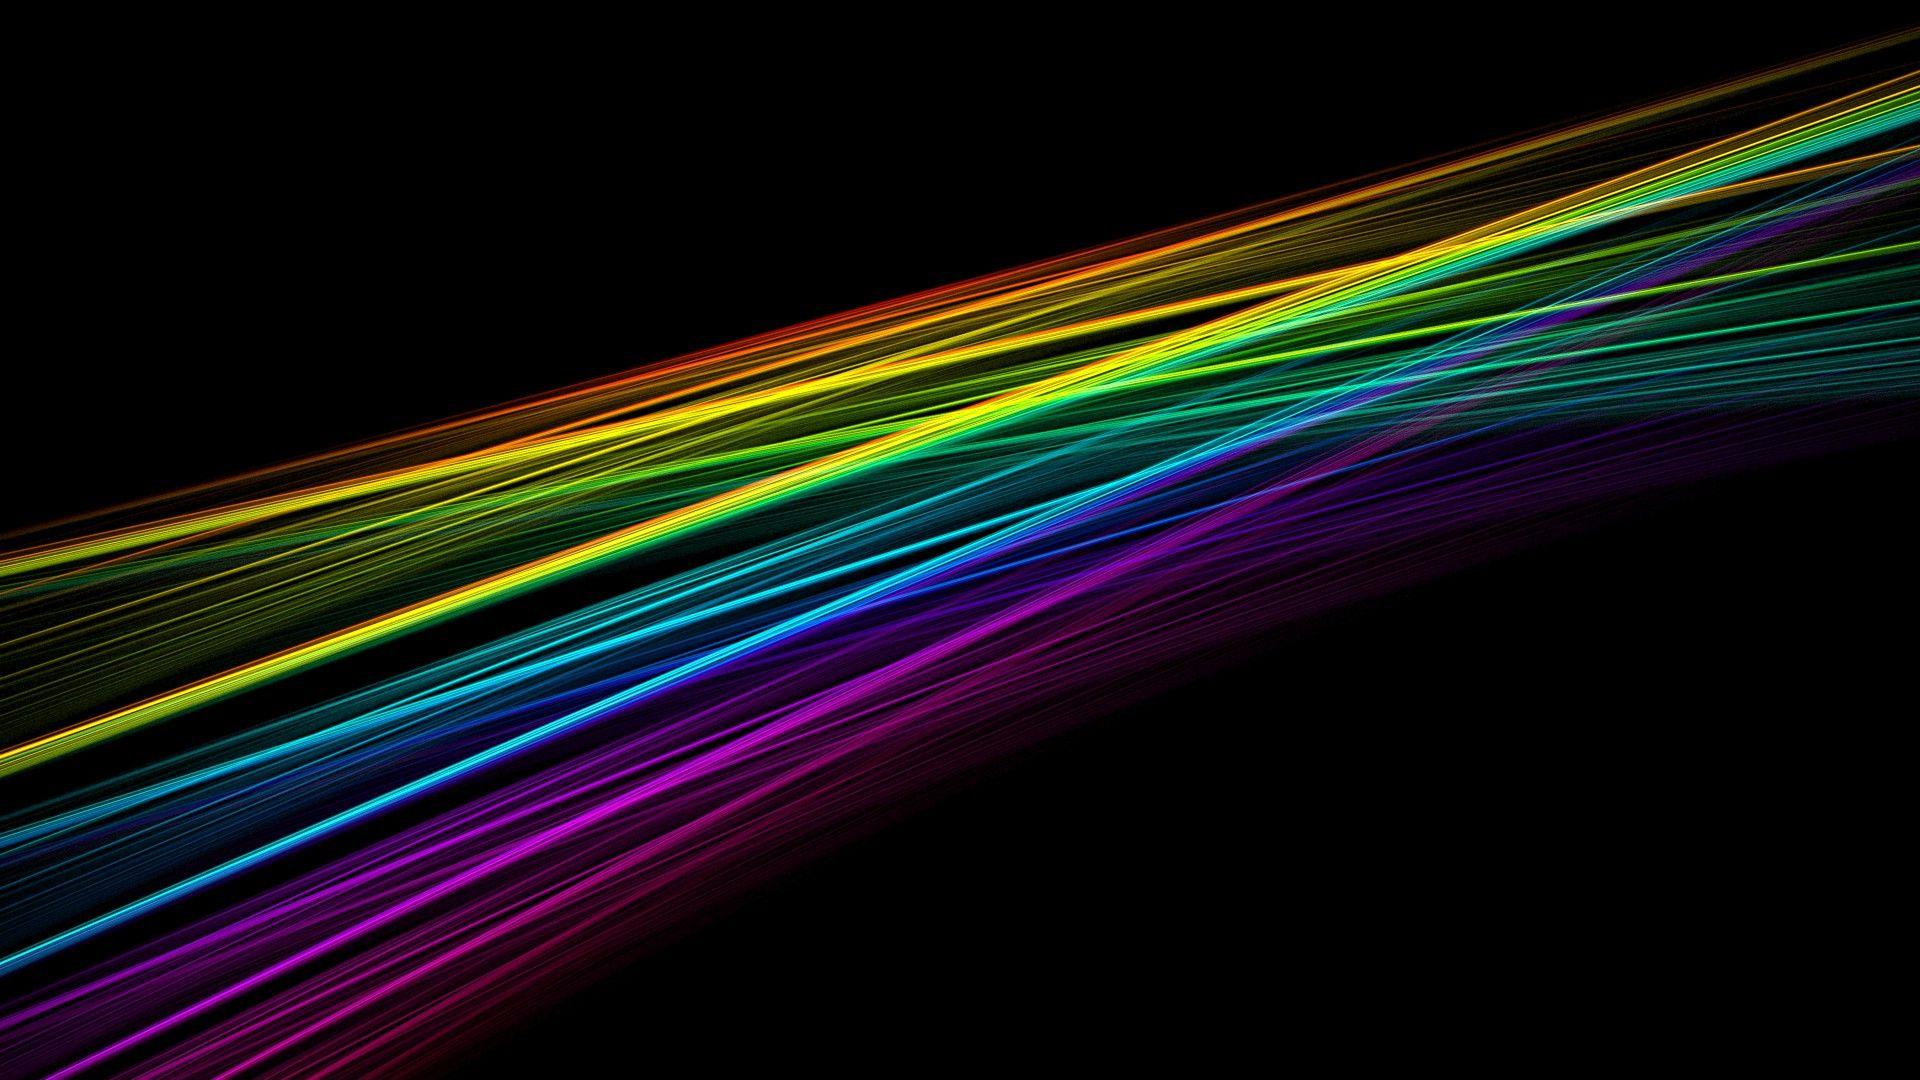 Abstract, Rainbow, Colorful, Black Background wallpaperd